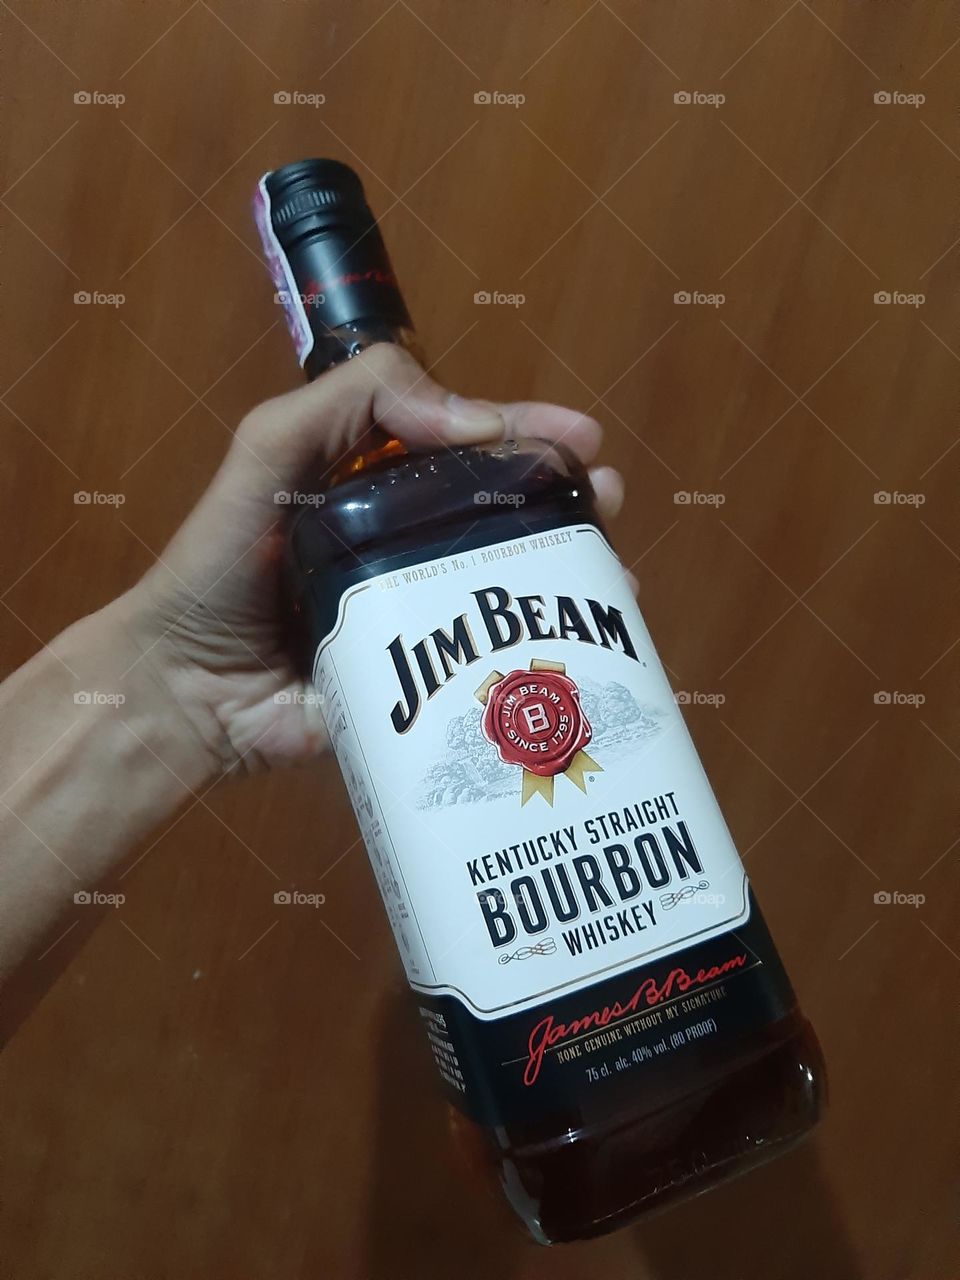 Special edition of Bourbon named Jim Beam